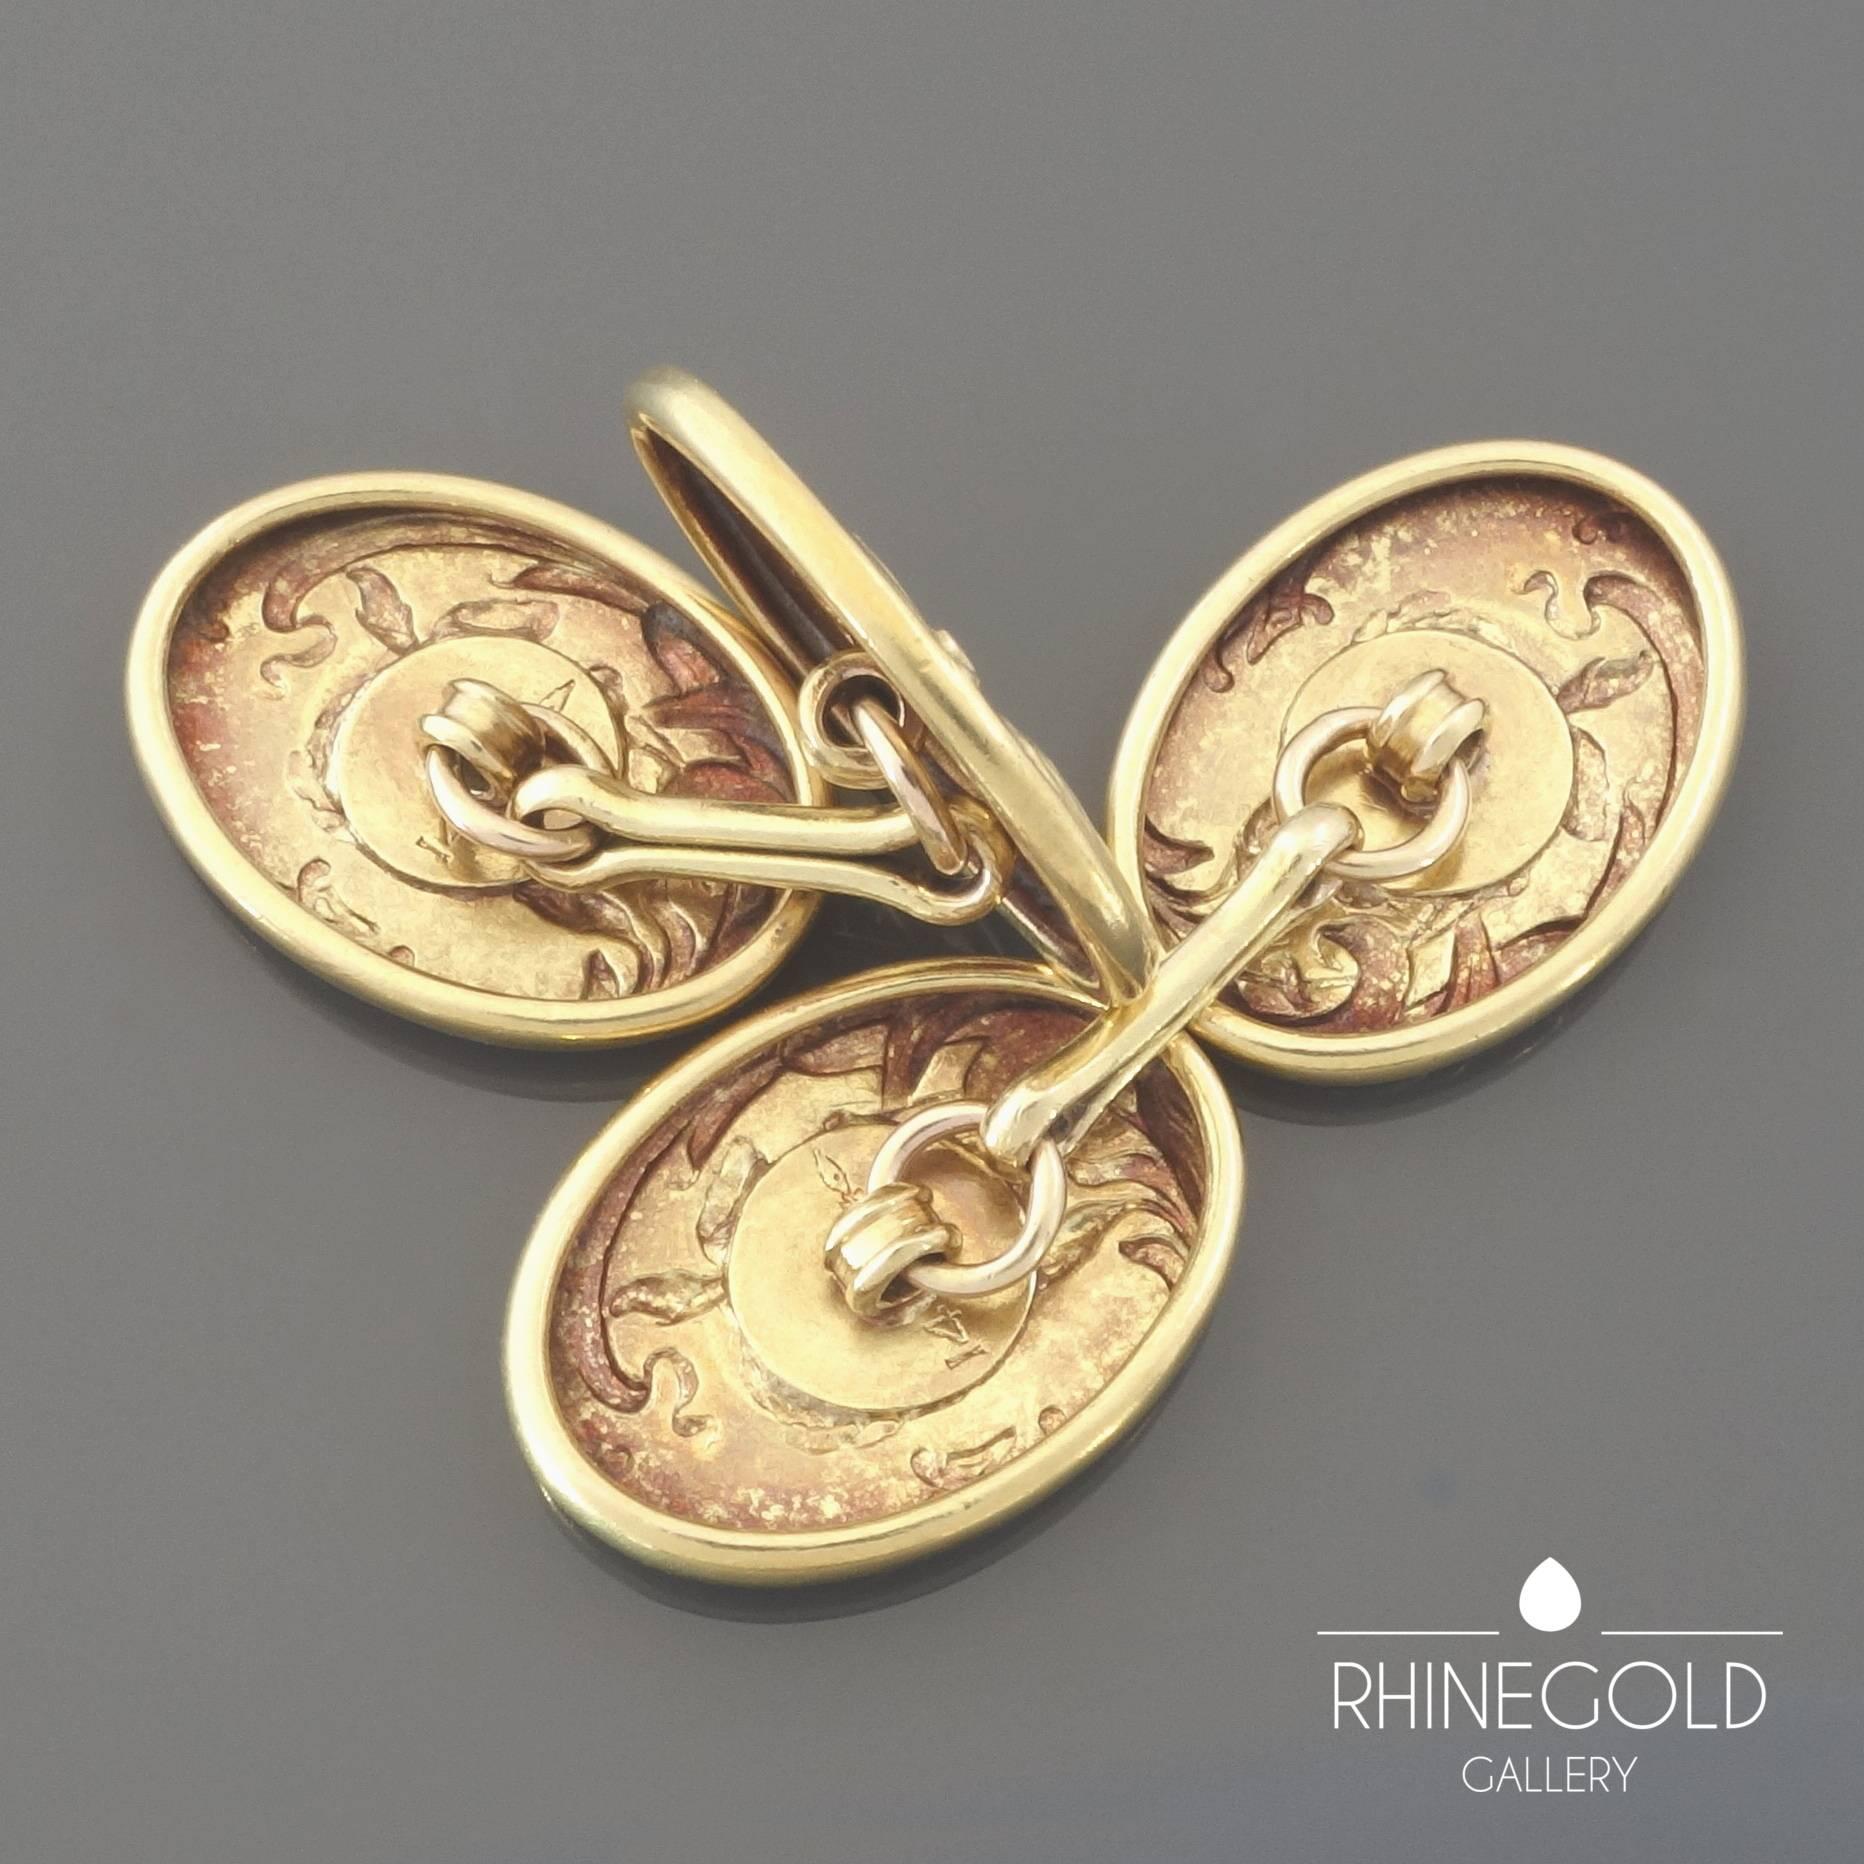 A Pair of Art Nouveau Iris Flower Repoussé Gold Double Cufflinks
14k yellow gold
Fronts 1.9 cm to 1.4 cm (approx. 3/4” to 9/16”)
Marks: ‘14’ for 14k gold plus illegible mark
ca. 1900

A repoussé iris flower in fine detail emerges from the stylized